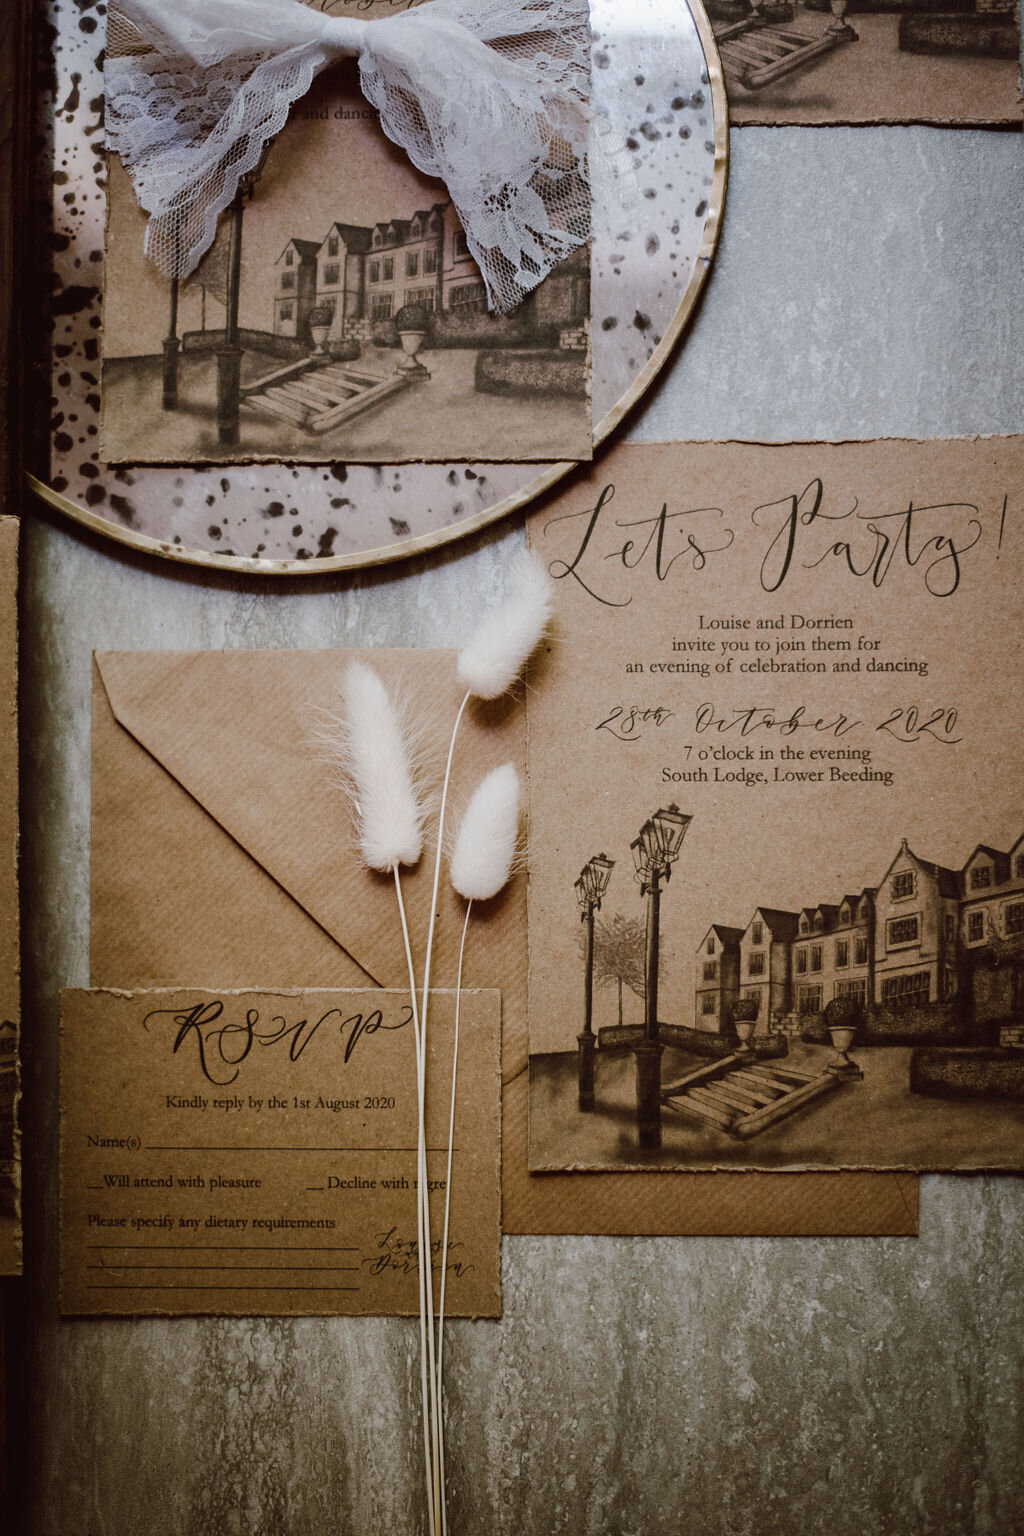 Evening invitation and RSVP - Rustic recycled paper wedding stationery suite by The Amyverse for South Lodge including calligraphy, venue illustration and kraft paper.jpg